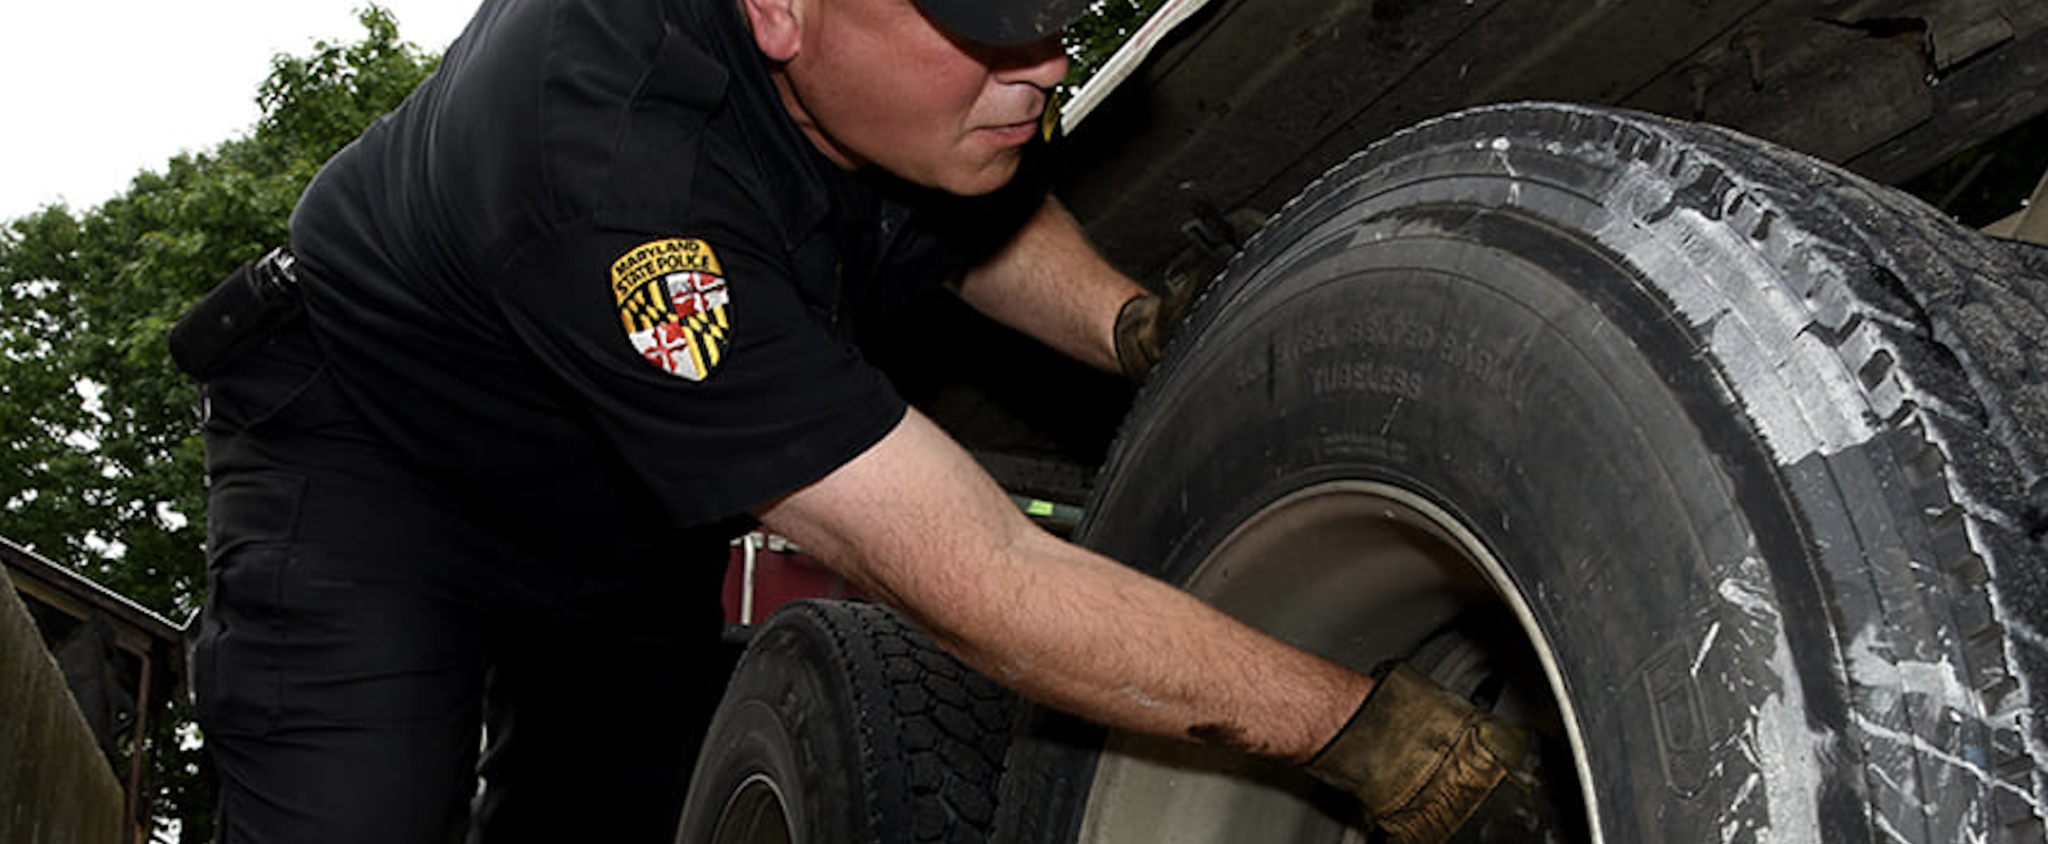 Inspectors to crack down on wheel ends during nation's biggest trucker